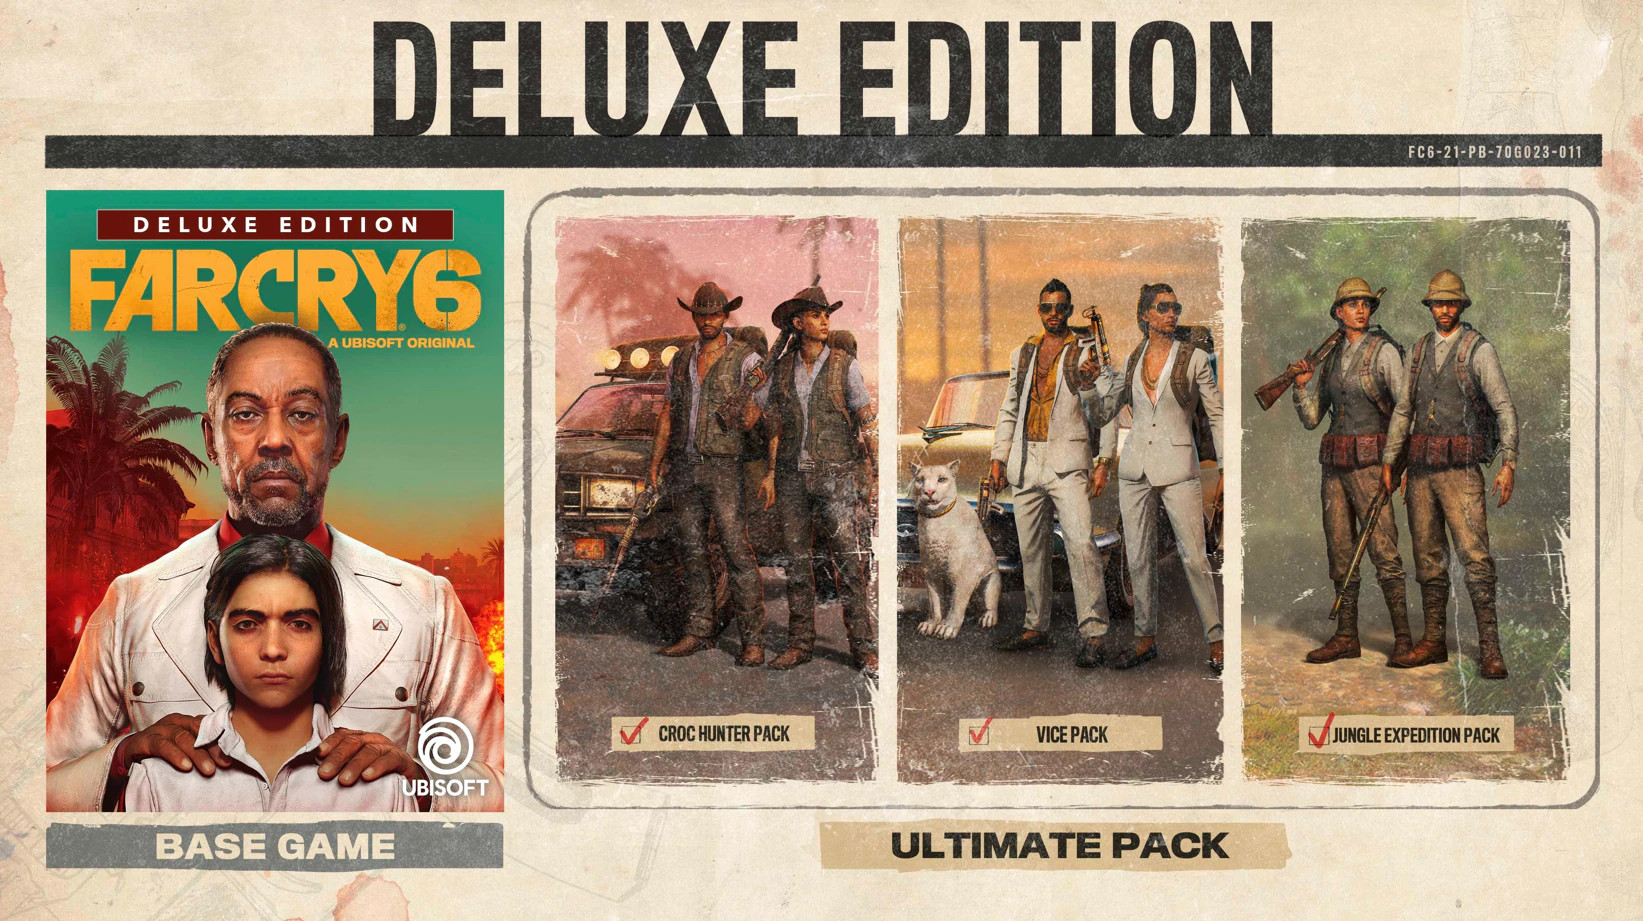 Far Cry 6 Deluxe Edition Steam Altergift, $71.12